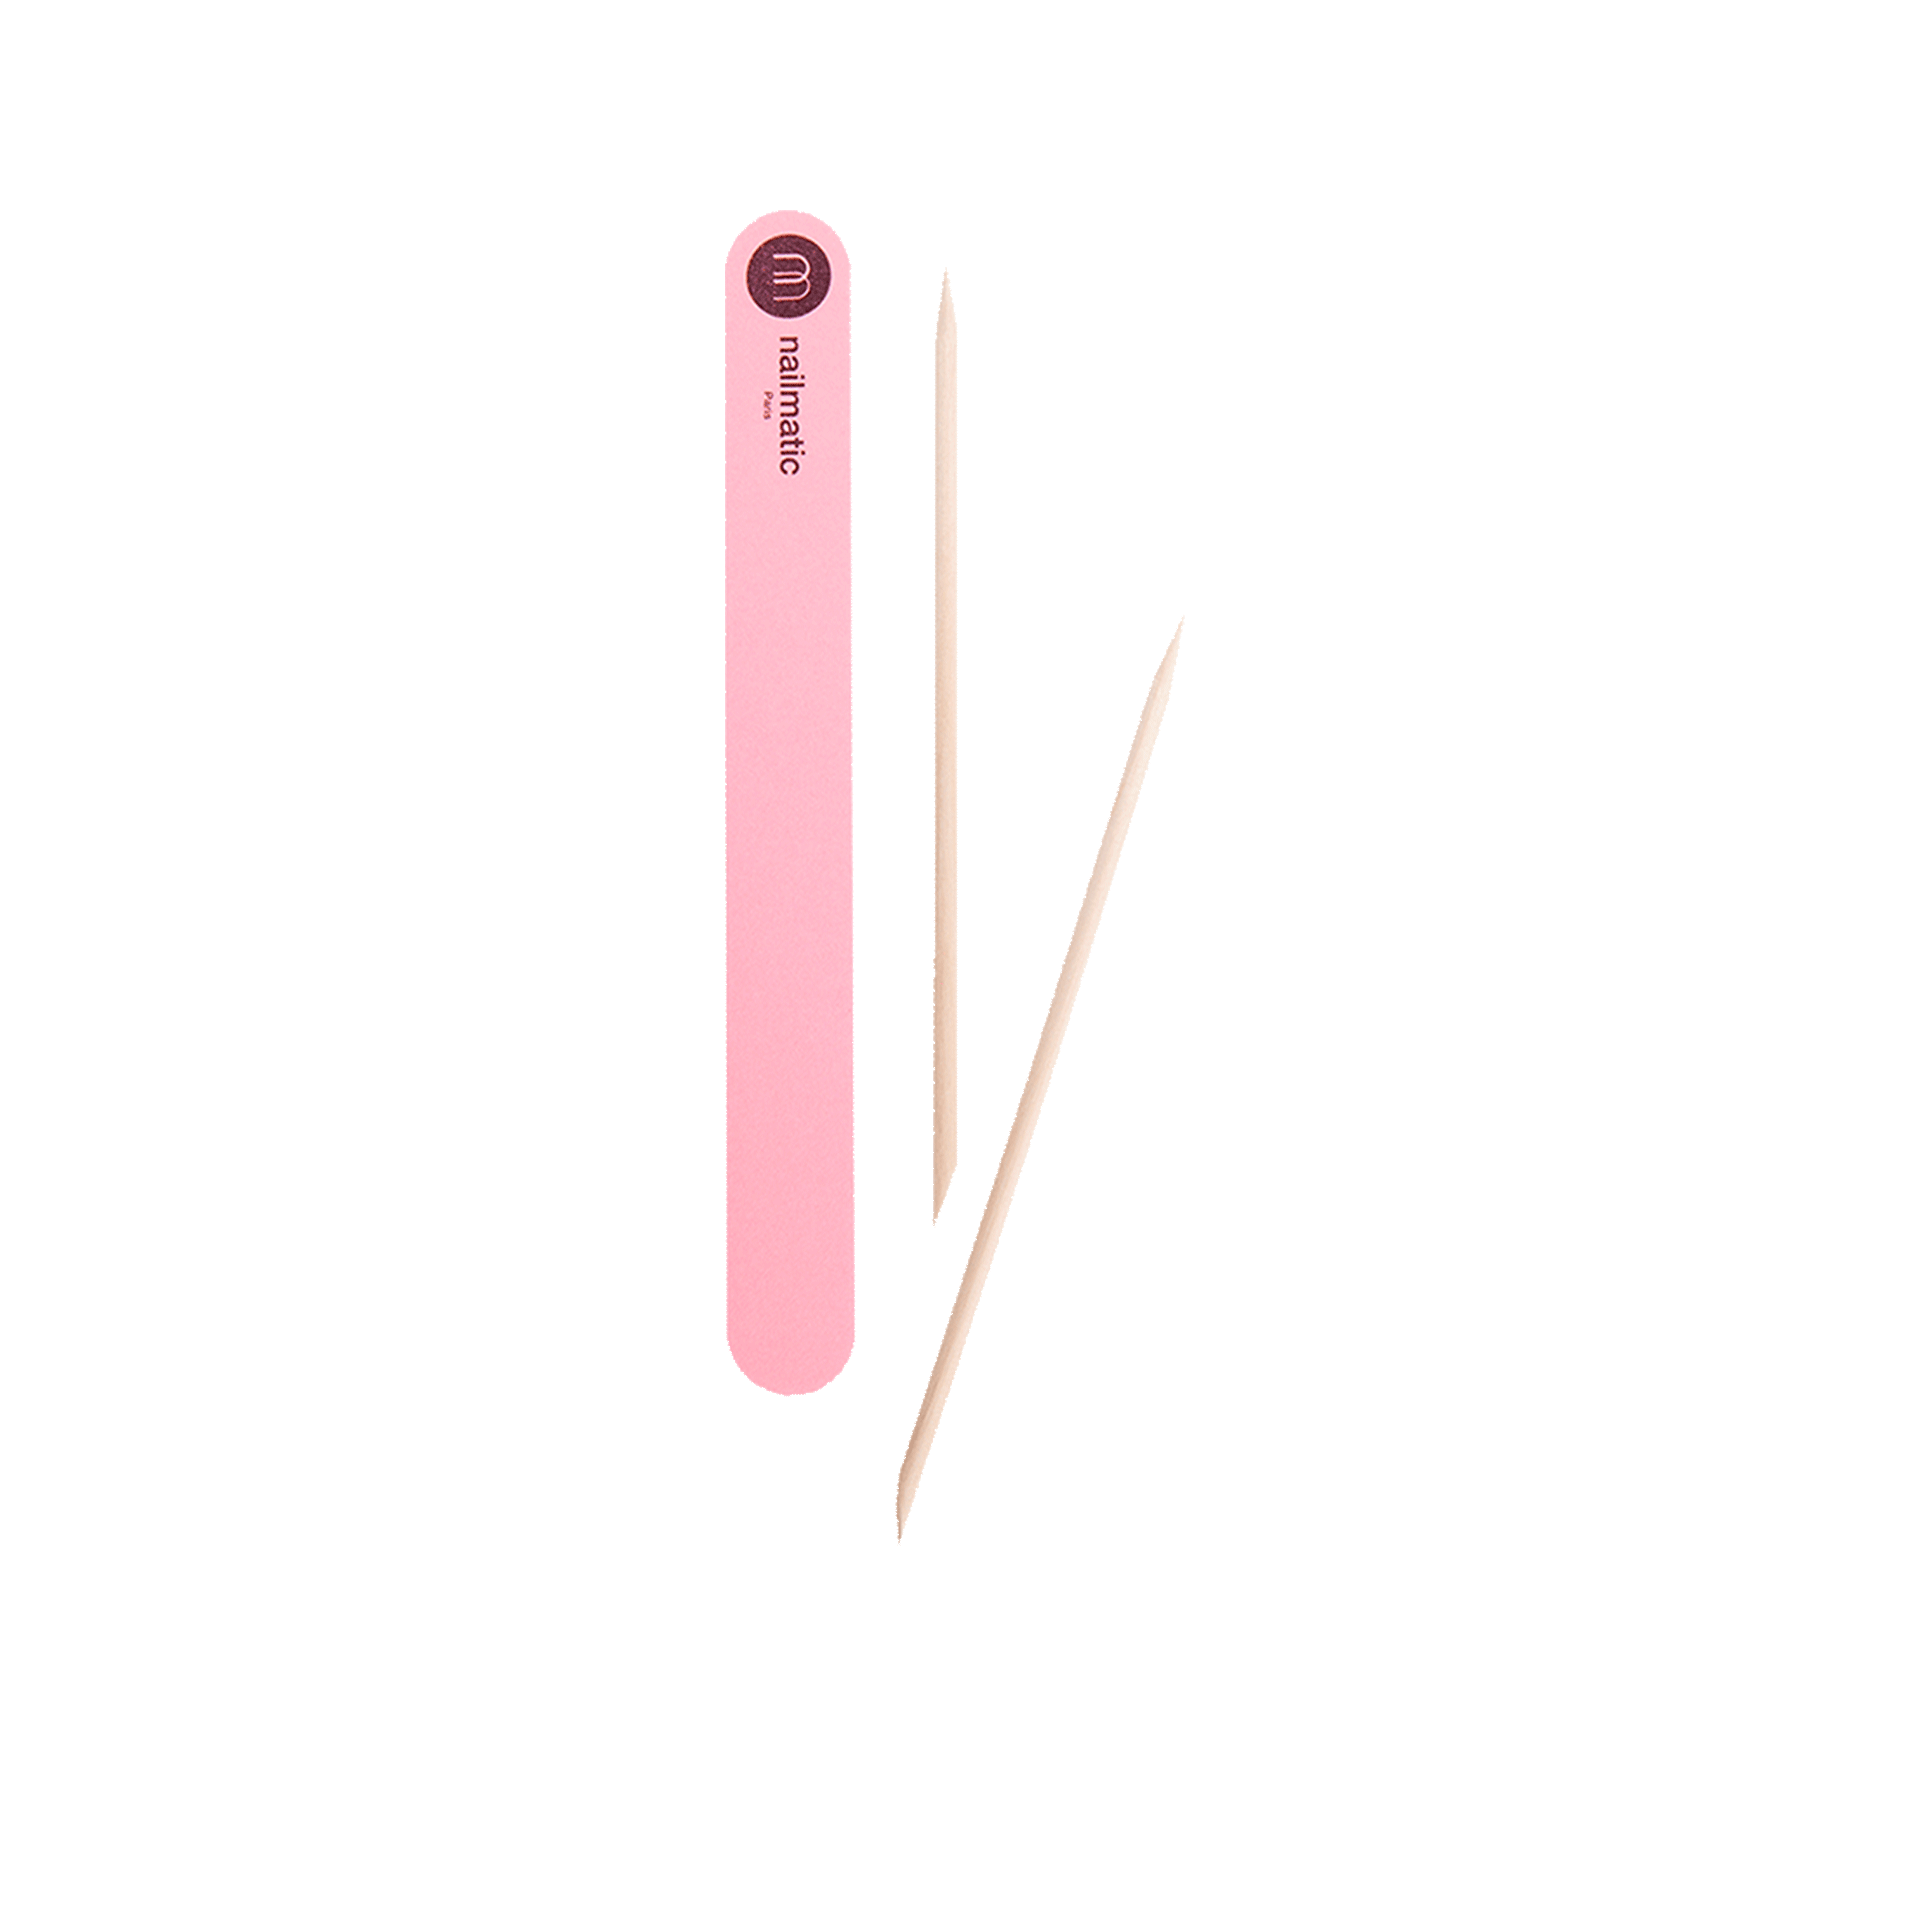 Double sided pink nail file kit